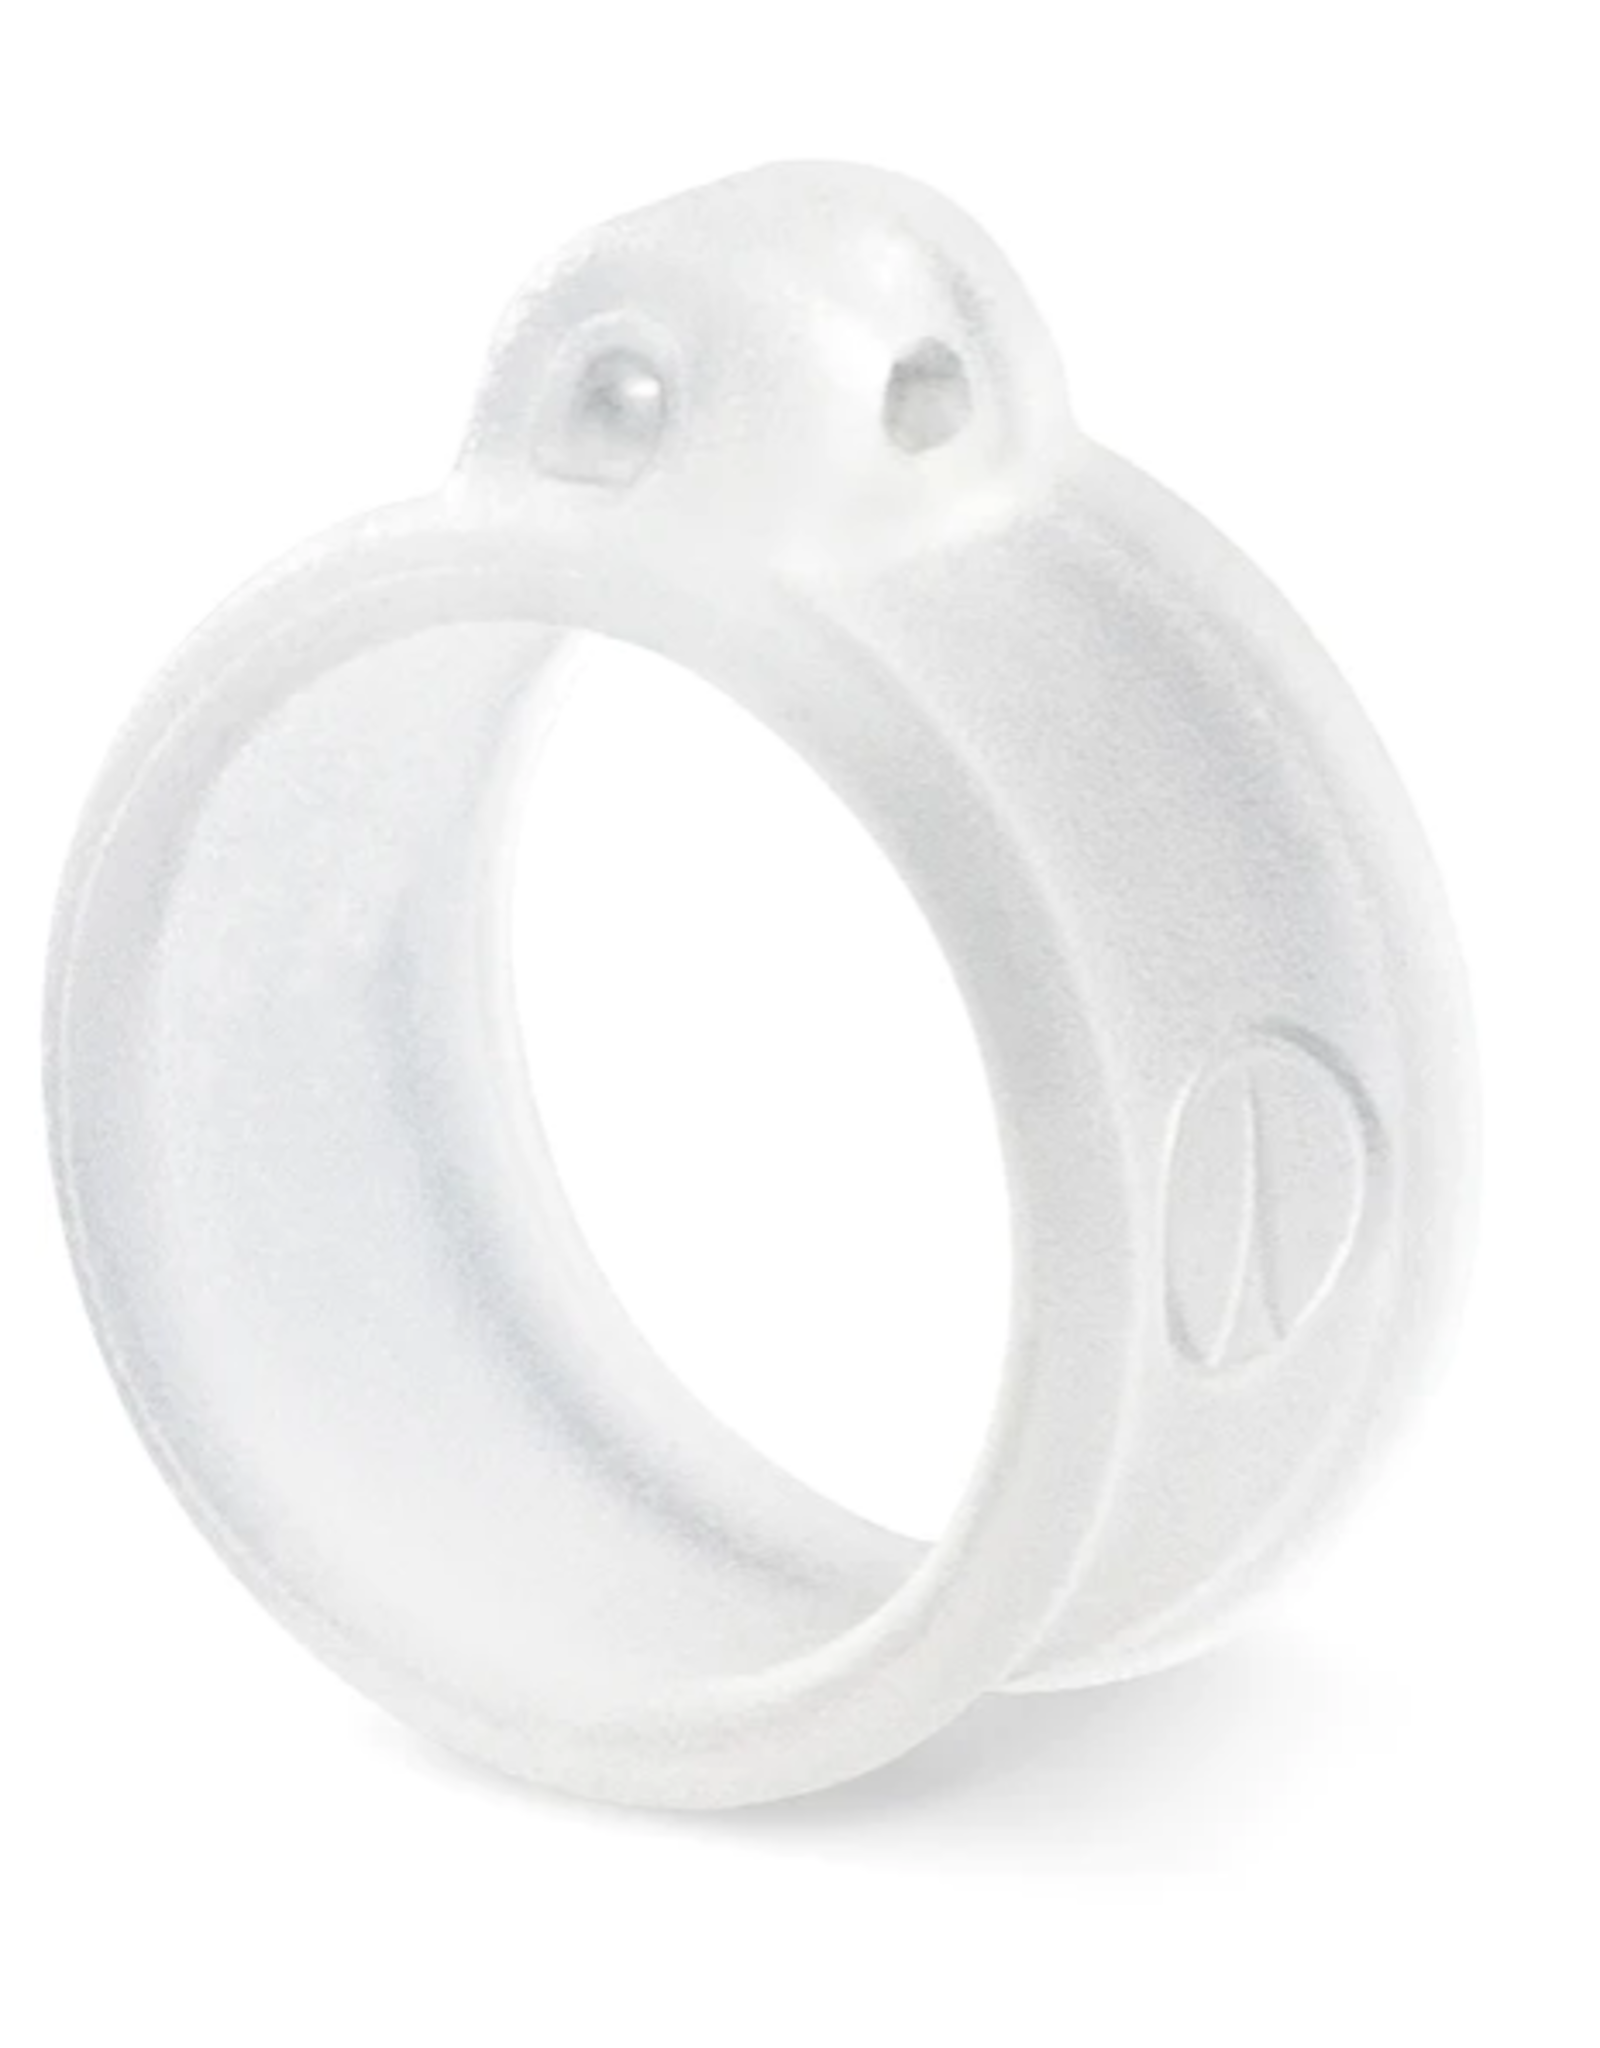 VMC Crossover Ring 4mm Clear 10pk